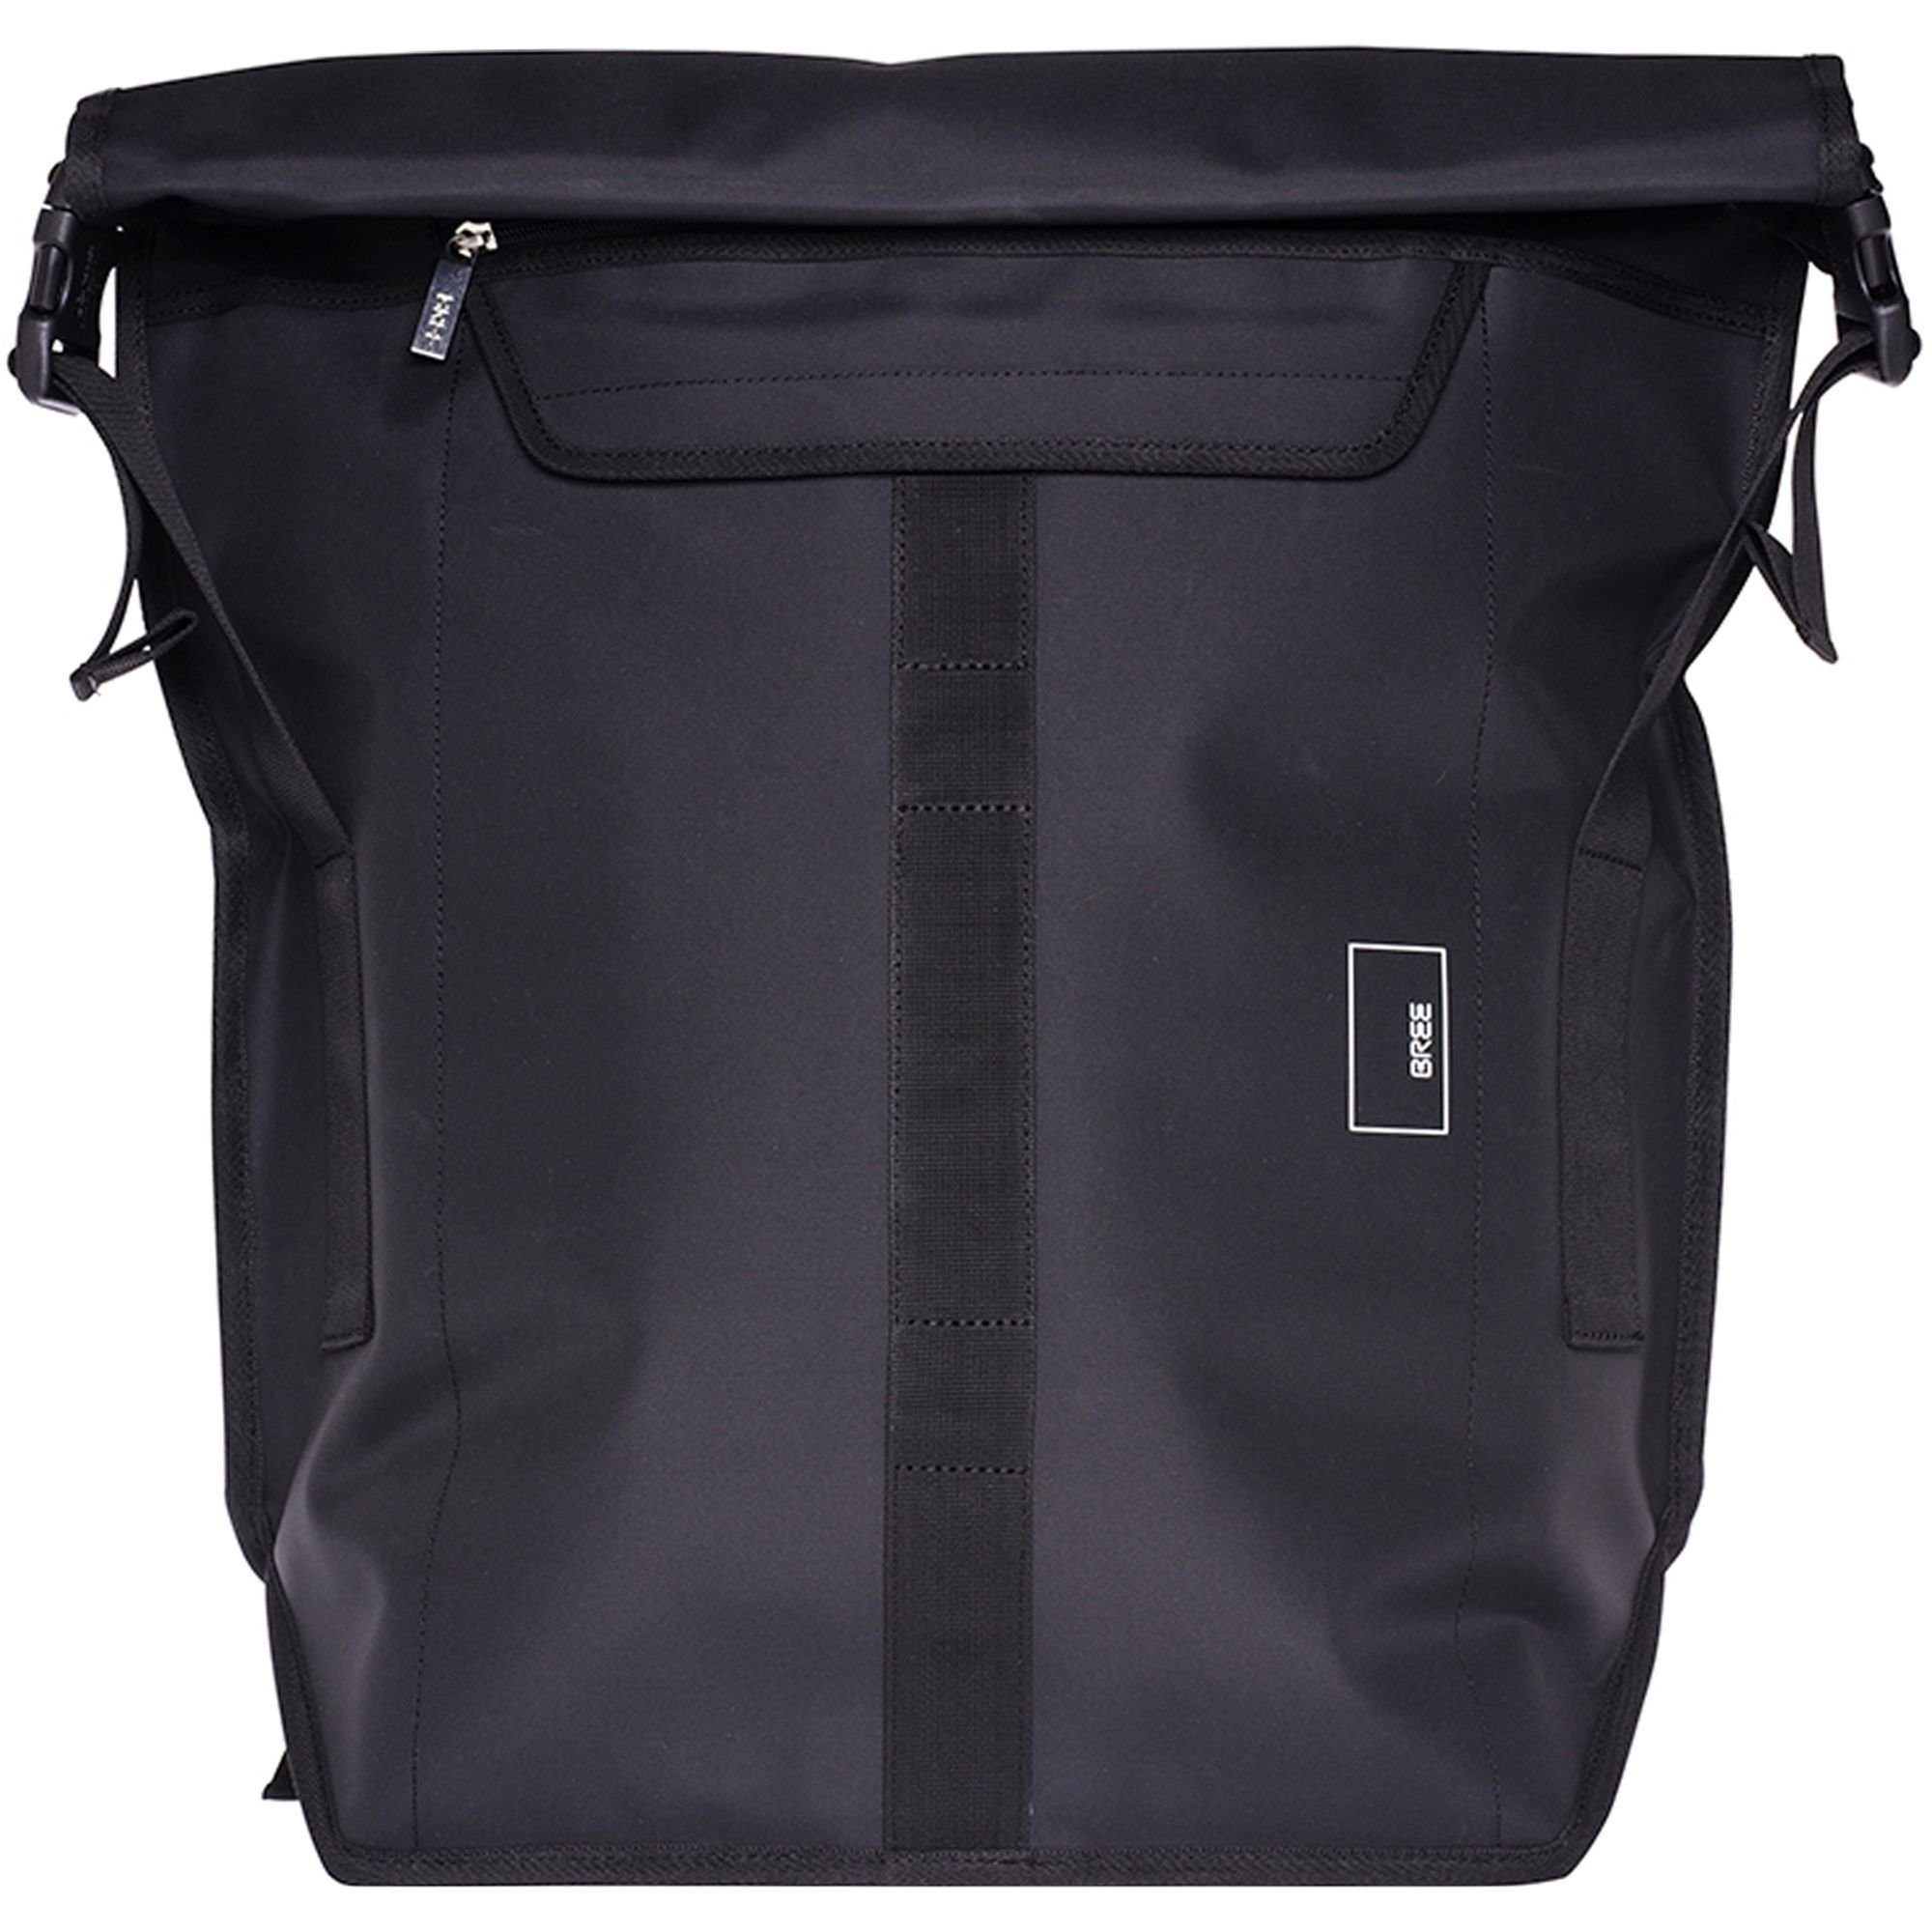 PNCH, BREE Daypack Polyester